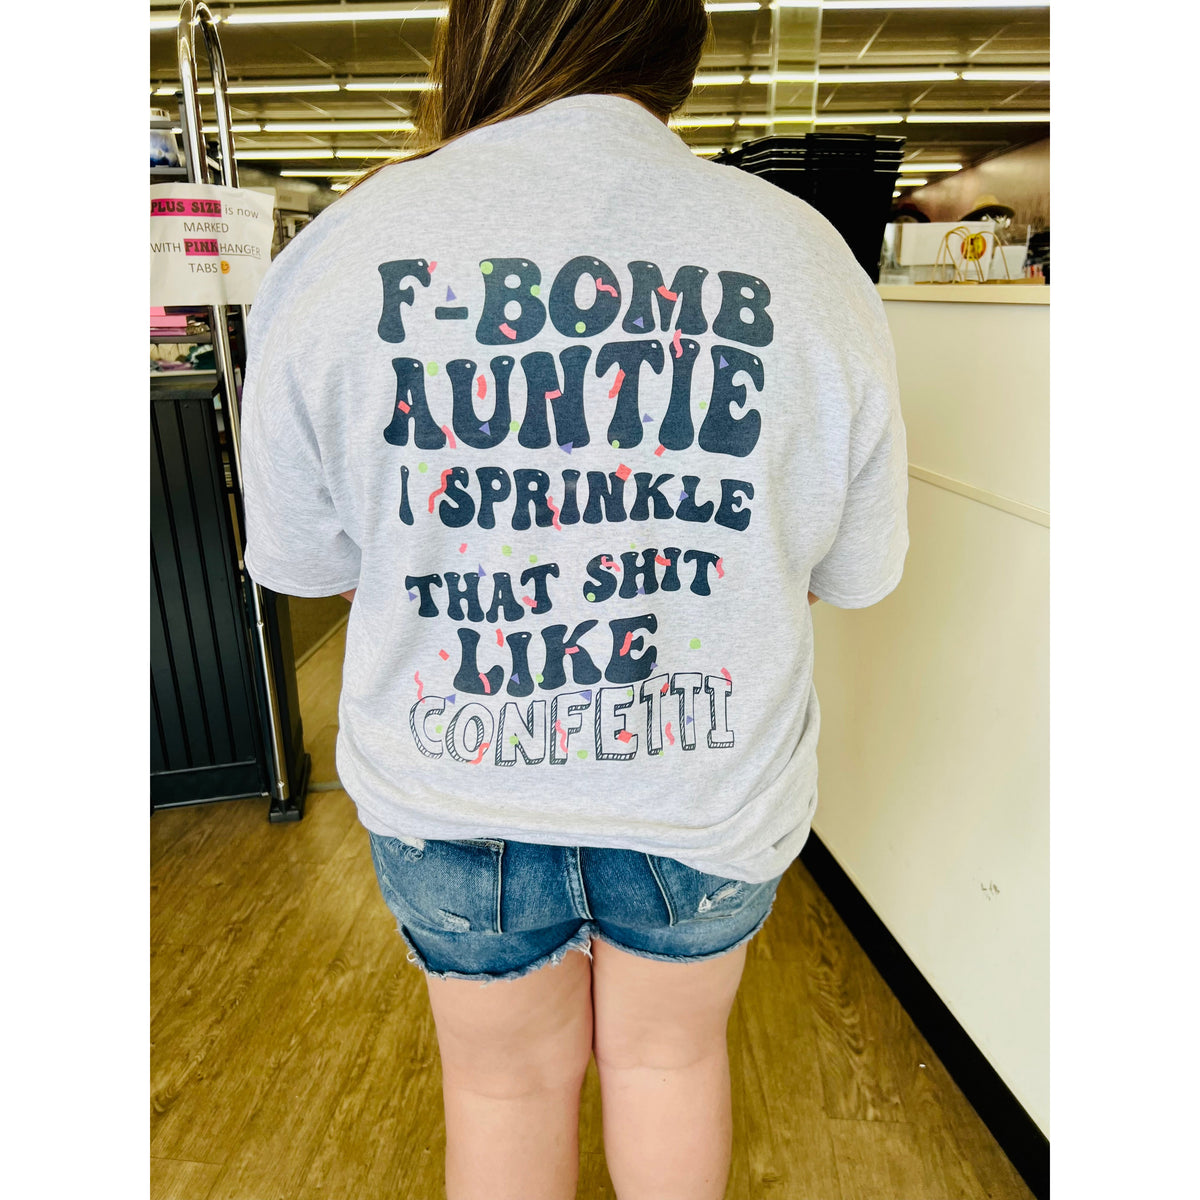 F-Bomb auntie I Sprinkle that shit like Confetti tee